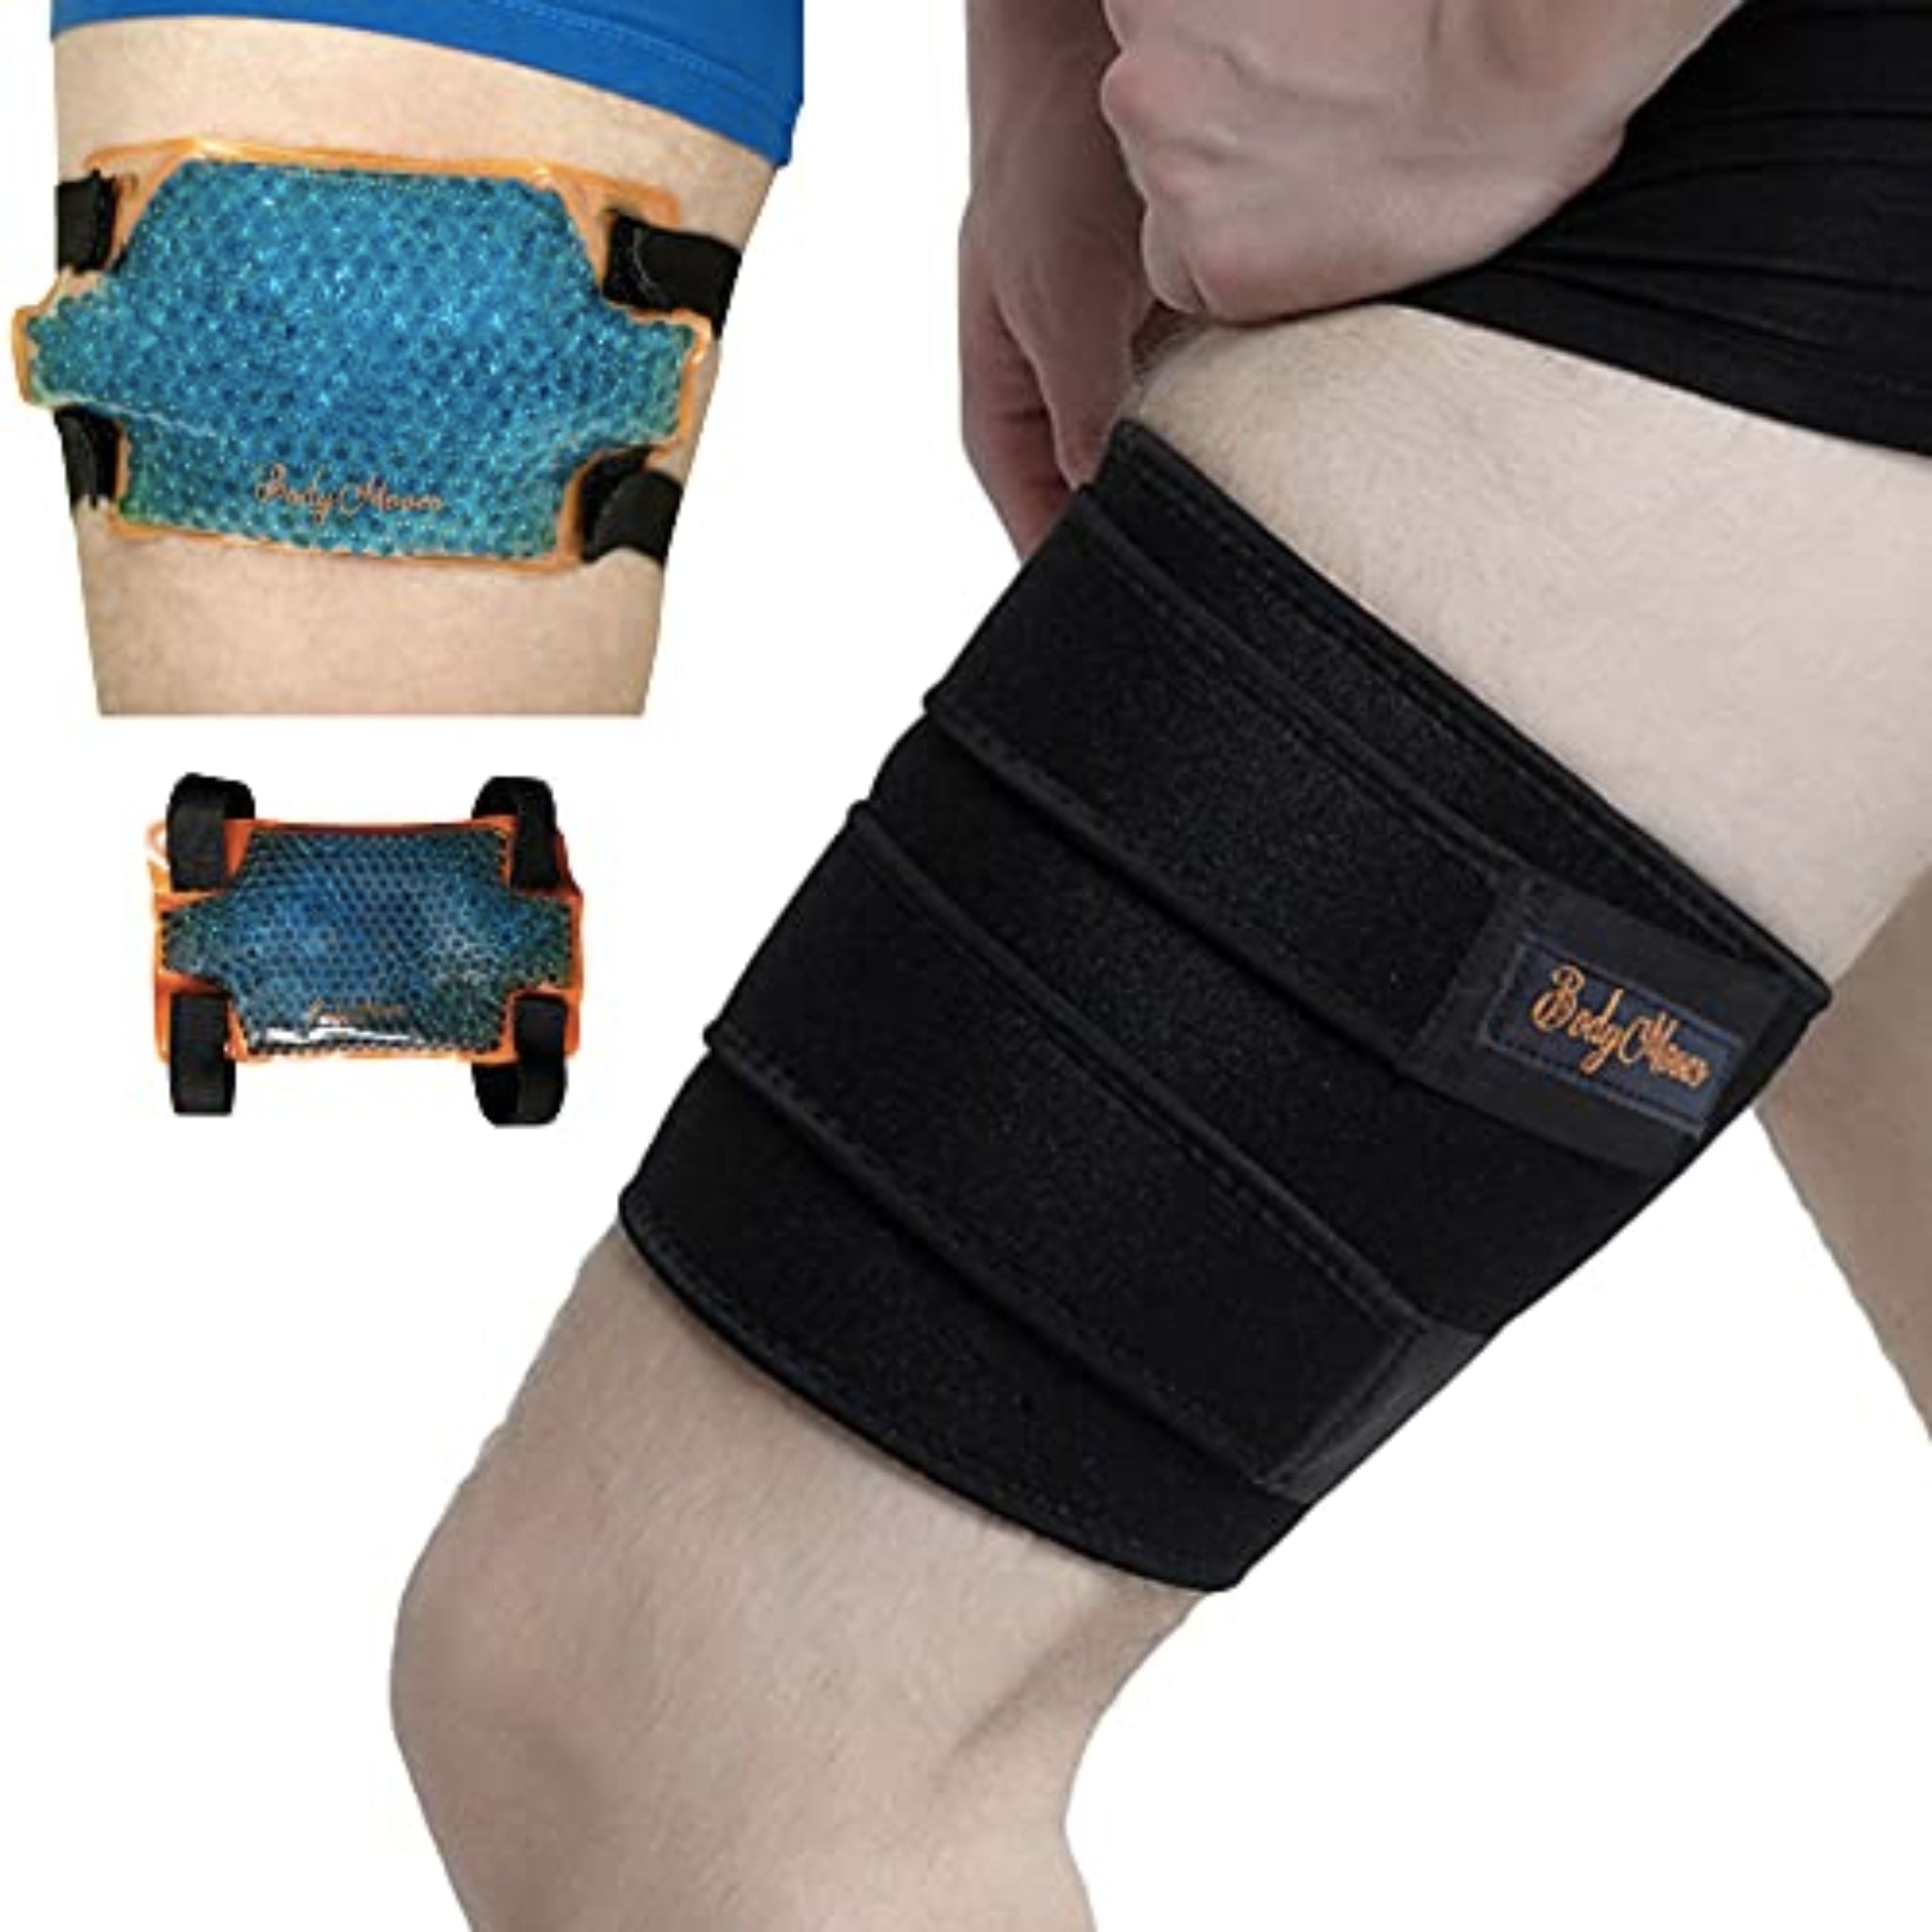 Thigh and Hamstring Brace Wrap with Hot and Cold Pack – supps247